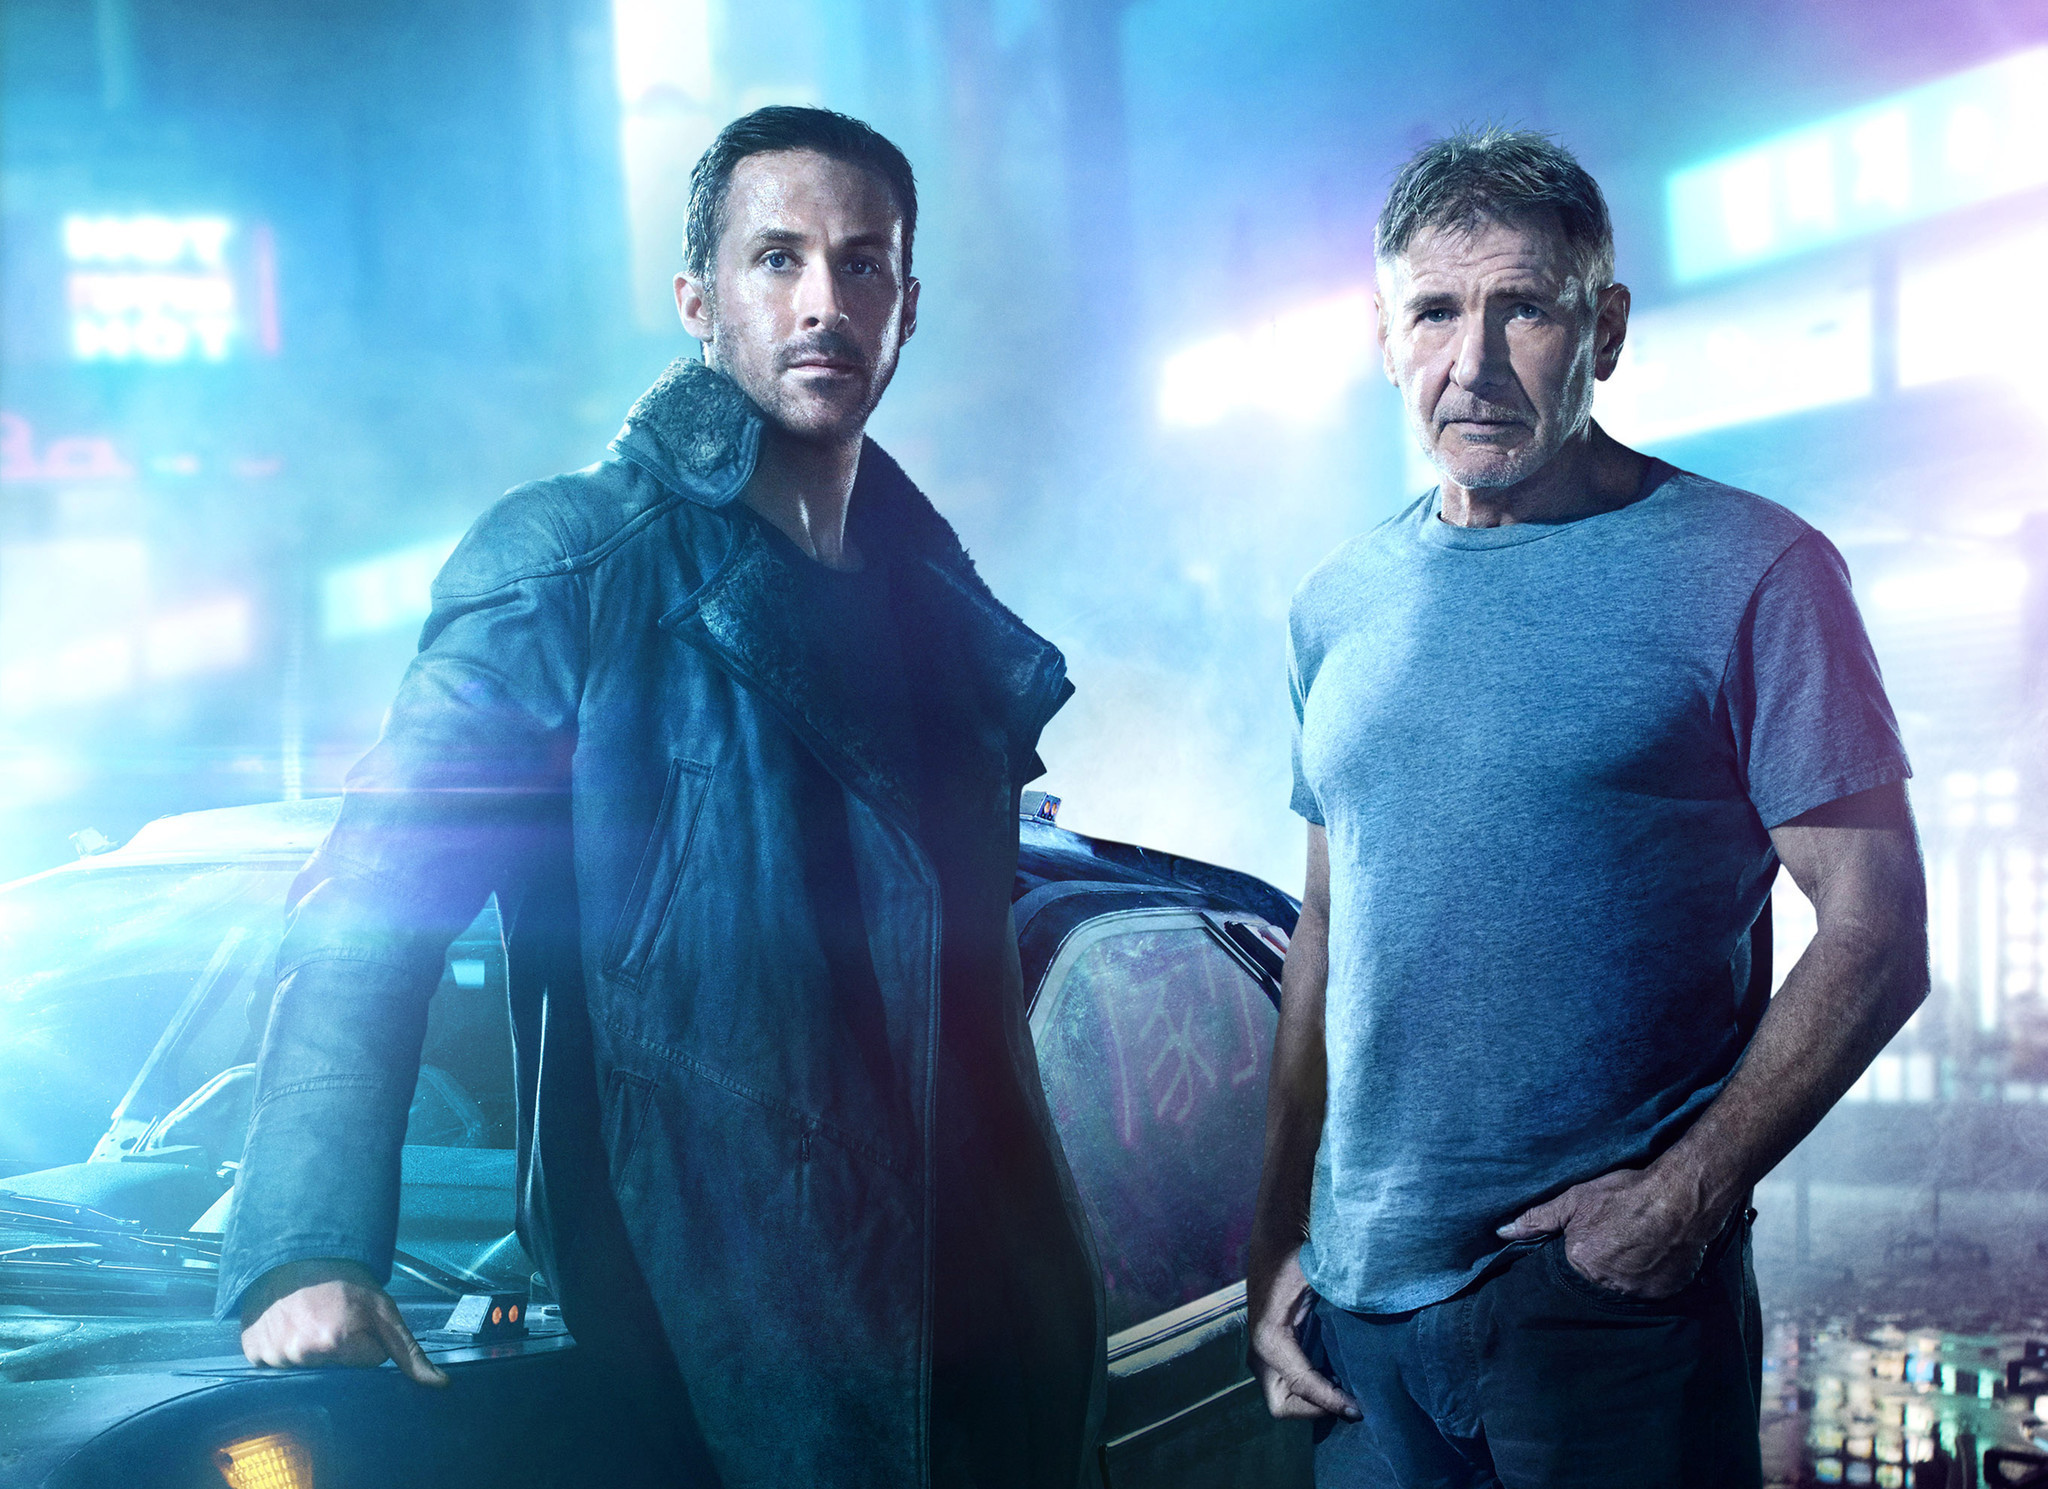 Ryan Gosling (right) plays Agent K, a Blade Runner tasked the same as Deckard before to ‘retire’ Replicants